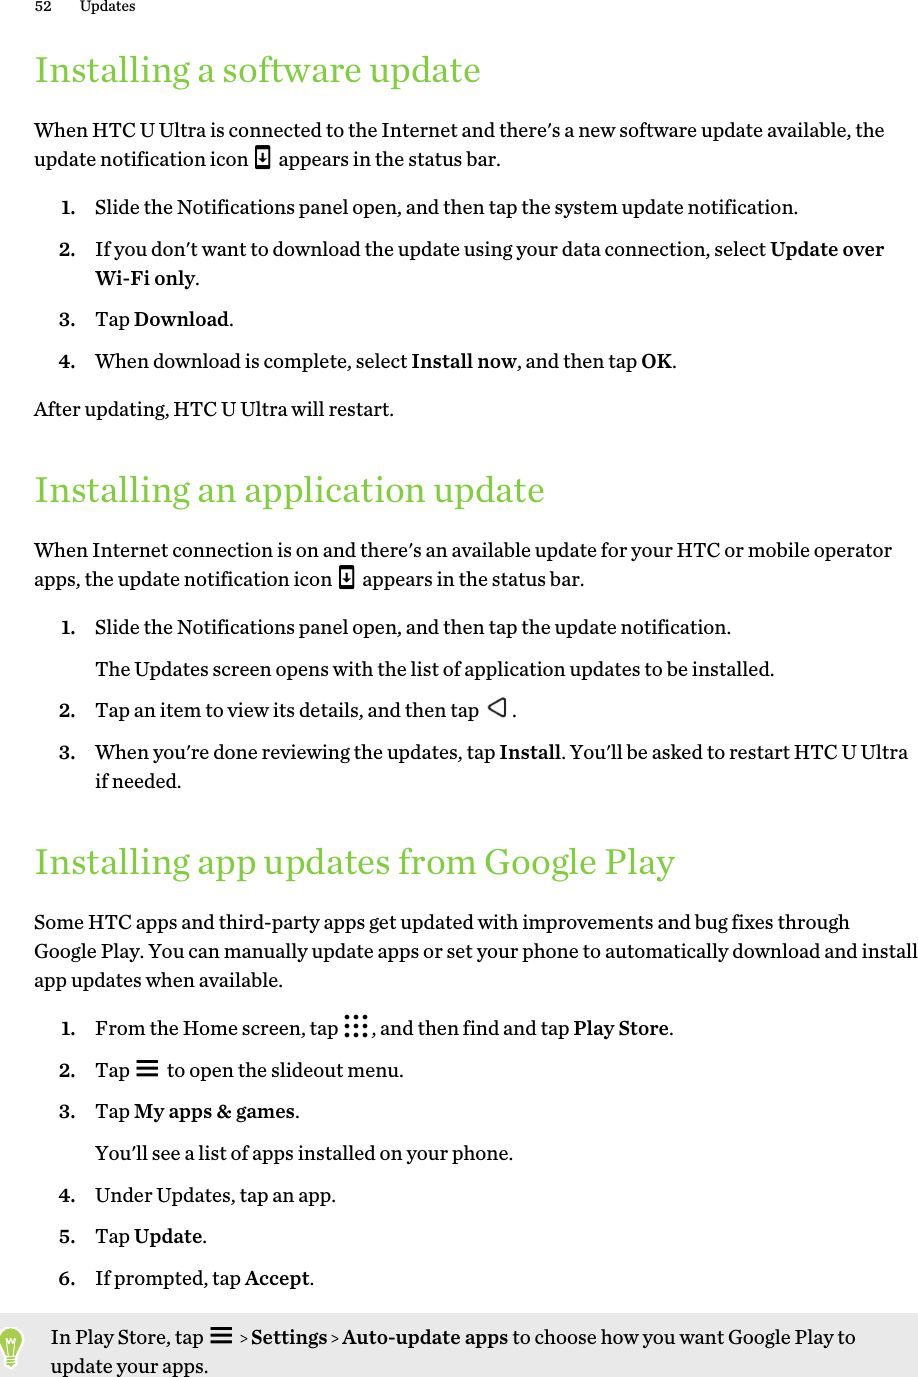 Installing a software updateWhen HTC U Ultra is connected to the Internet and there&apos;s a new software update available, theupdate notification icon   appears in the status bar.1. Slide the Notifications panel open, and then tap the system update notification.2. If you don&apos;t want to download the update using your data connection, select Update overWi-Fi only.3. Tap Download.4. When download is complete, select Install now, and then tap OK.After updating, HTC U Ultra will restart.Installing an application updateWhen Internet connection is on and there&apos;s an available update for your HTC or mobile operatorapps, the update notification icon   appears in the status bar.1. Slide the Notifications panel open, and then tap the update notification. The Updates screen opens with the list of application updates to be installed.2. Tap an item to view its details, and then tap  .3. When you&apos;re done reviewing the updates, tap Install. You&apos;ll be asked to restart HTC U Ultraif needed.Installing app updates from Google PlaySome HTC apps and third-party apps get updated with improvements and bug fixes throughGoogle Play. You can manually update apps or set your phone to automatically download and installapp updates when available.1. From the Home screen, tap  , and then find and tap Play Store.2. Tap   to open the slideout menu.3. Tap My apps &amp; games. You&apos;ll see a list of apps installed on your phone.4. Under Updates, tap an app.5. Tap Update.6. If prompted, tap Accept.In Play Store, tap     Settings   Auto-update apps to choose how you want Google Play toupdate your apps.52 Updates